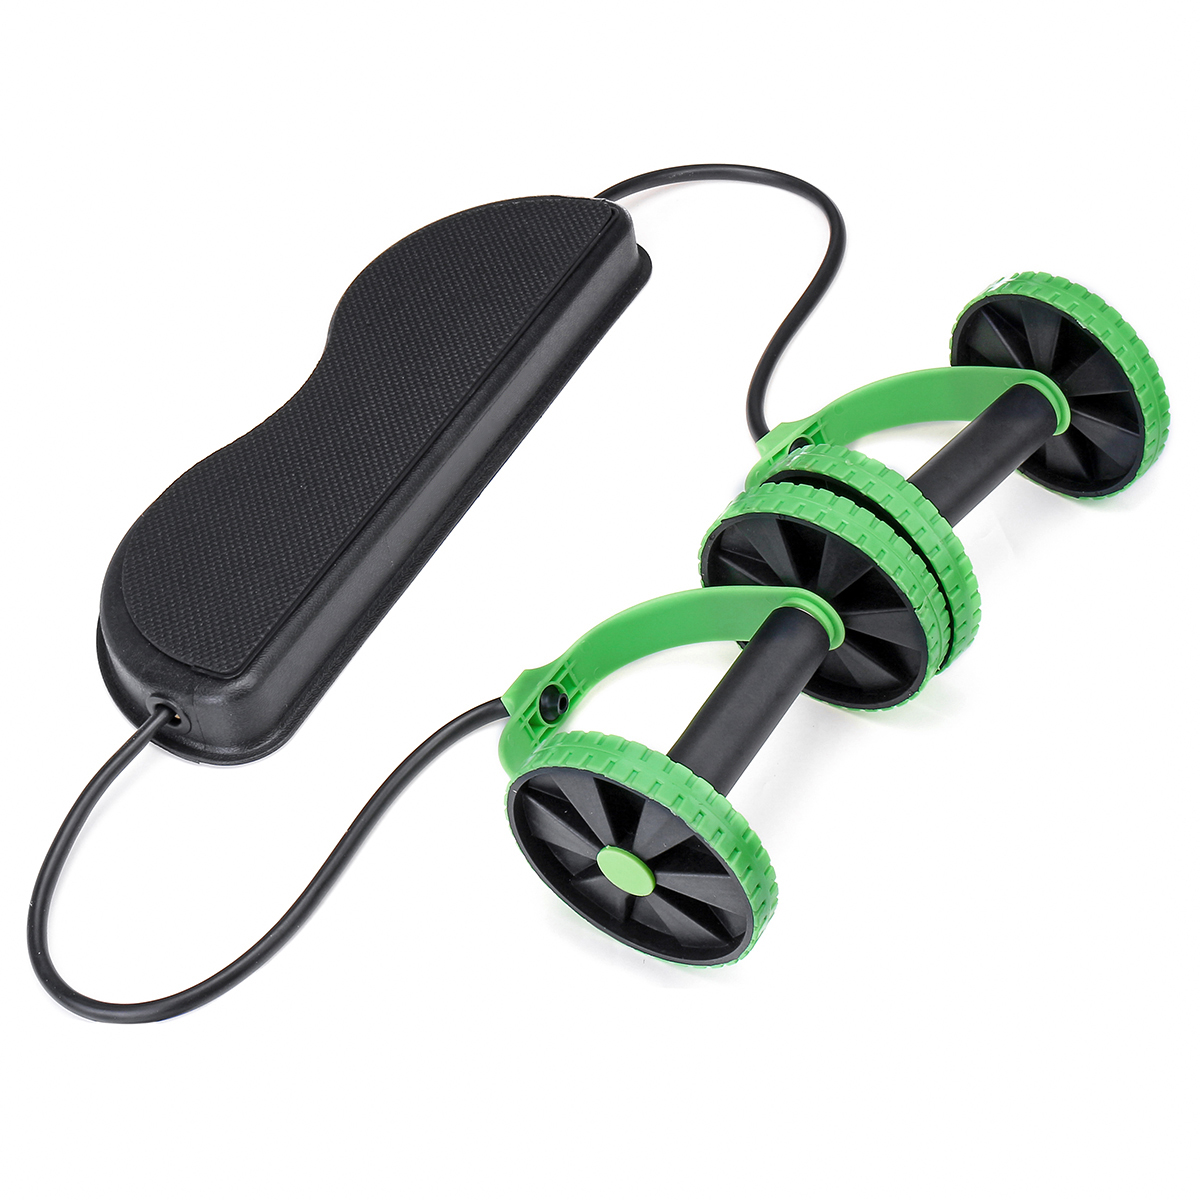 Multifunction-Fitness-Equipment-Ab-Roller-Pedal-Sit-up-Pull-Rope-Training-Muscle-Abdominal-Exercise--1681319-3